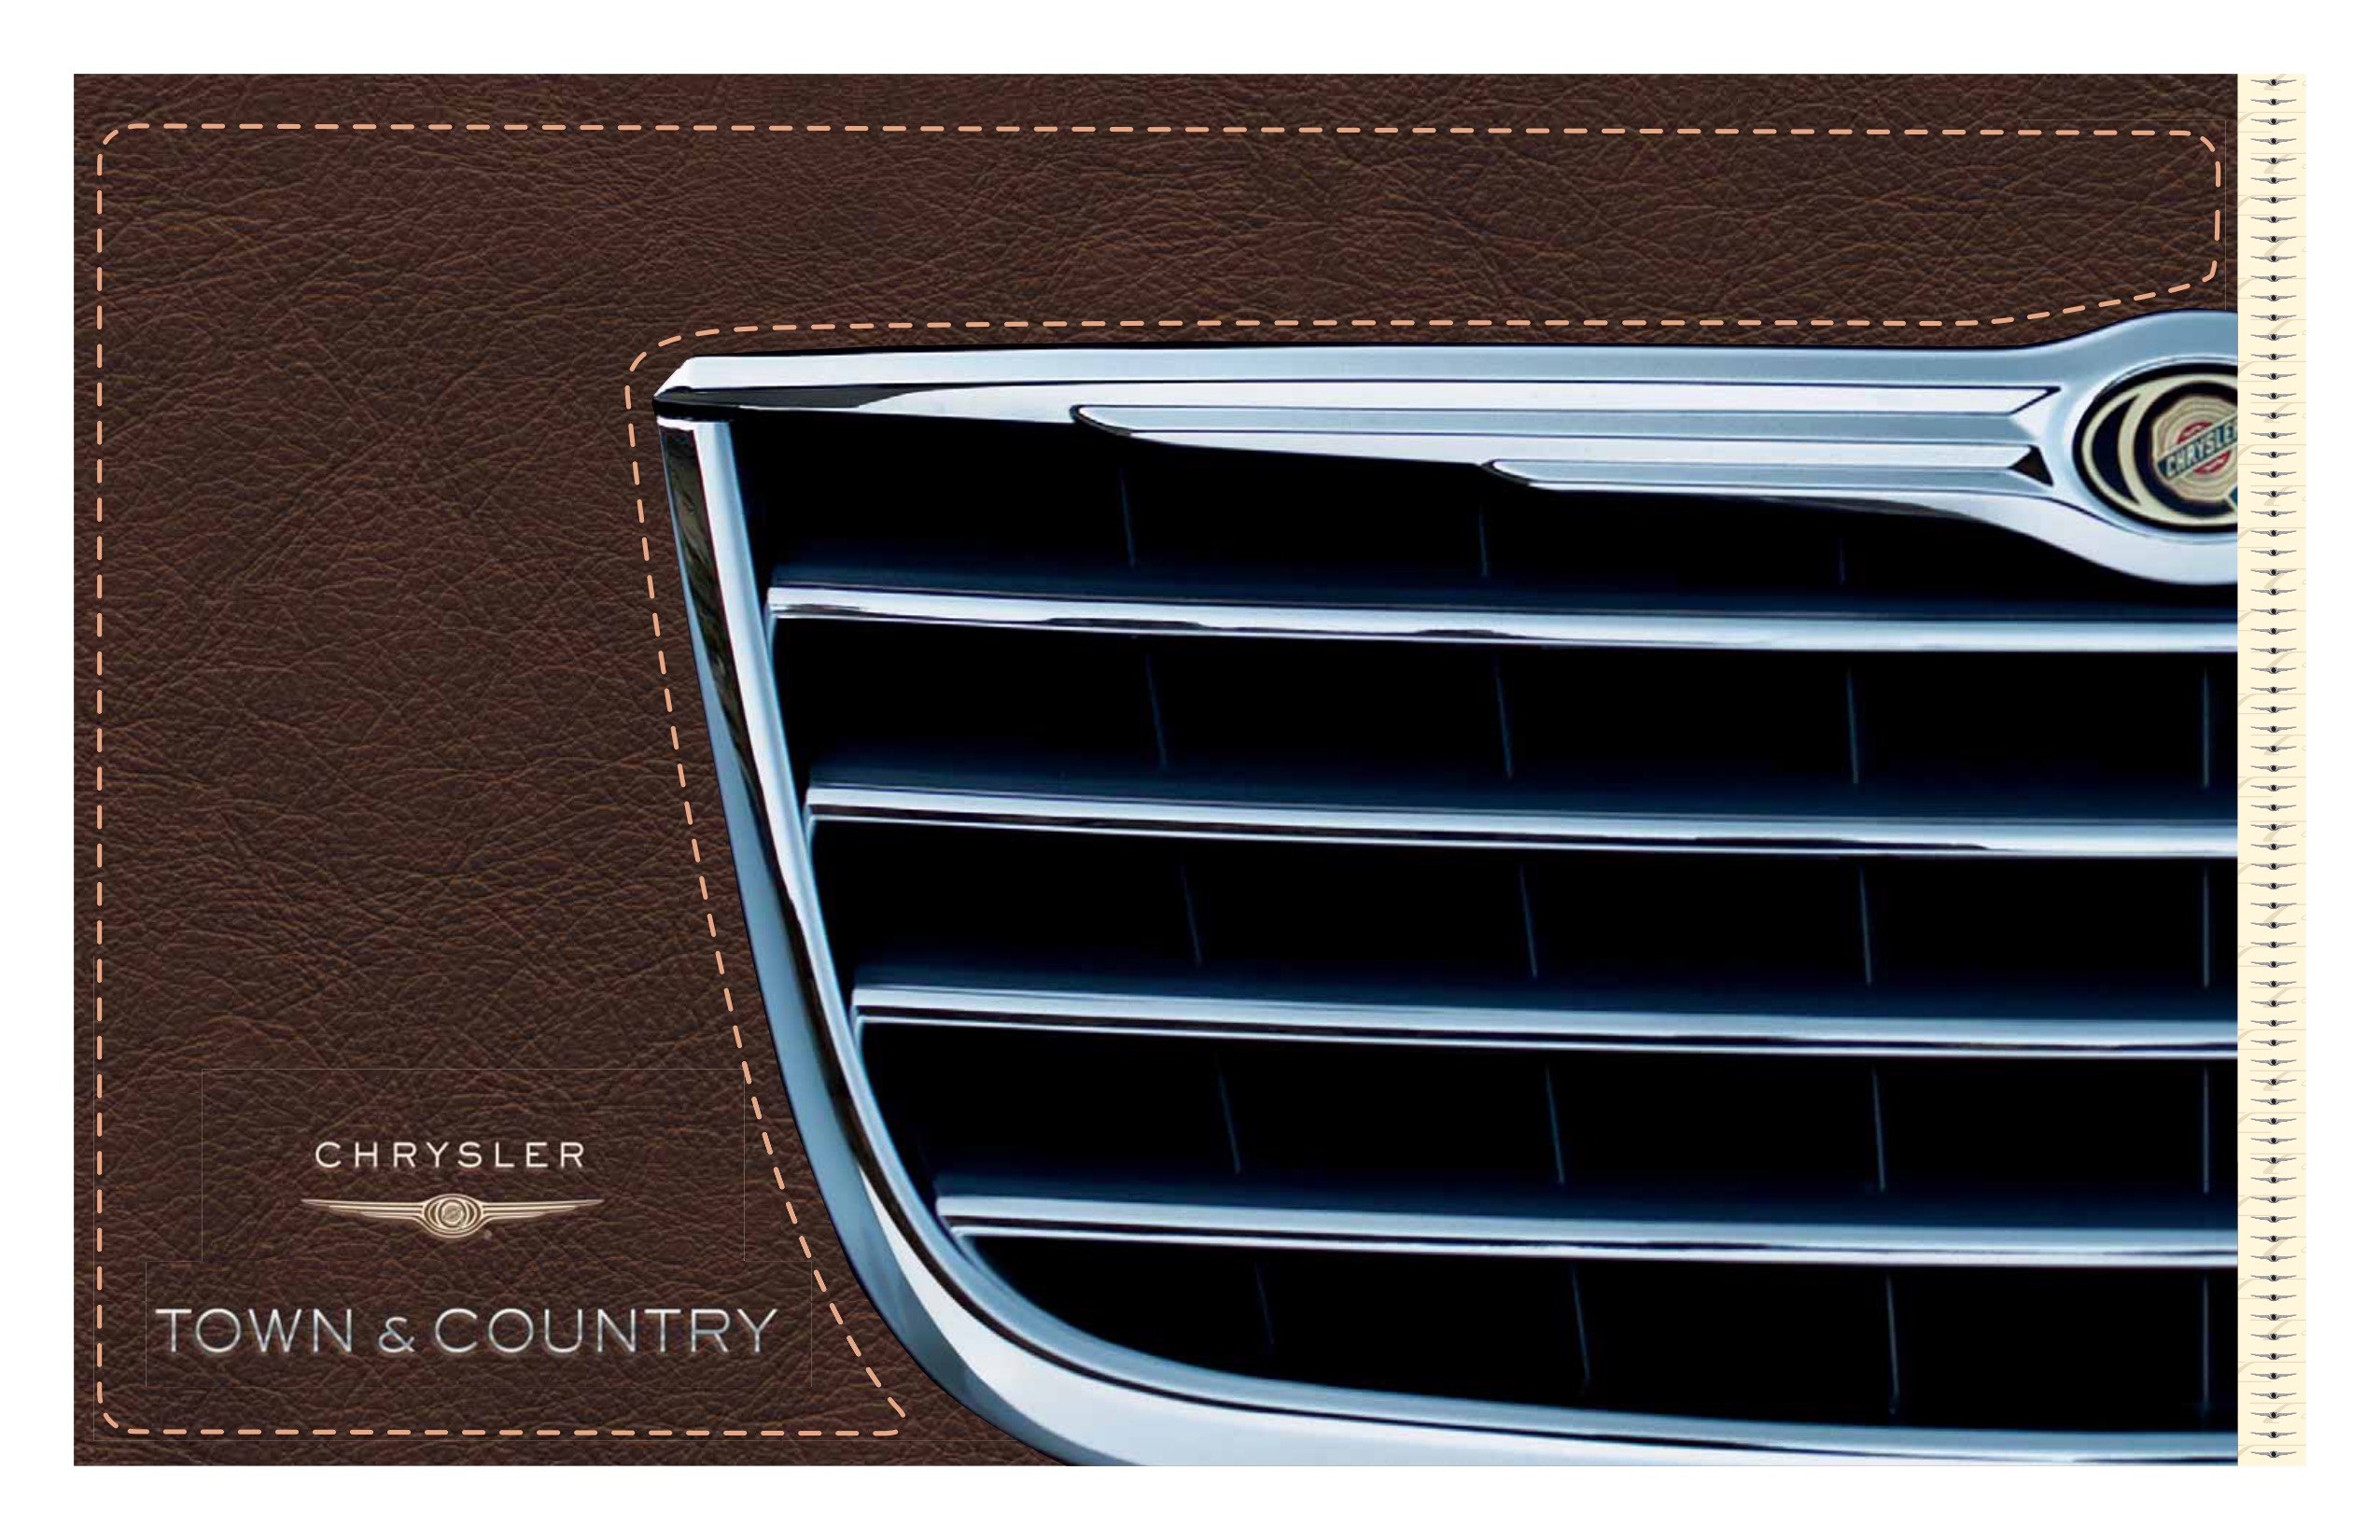 2010 Chrysler Town & Country Brochure